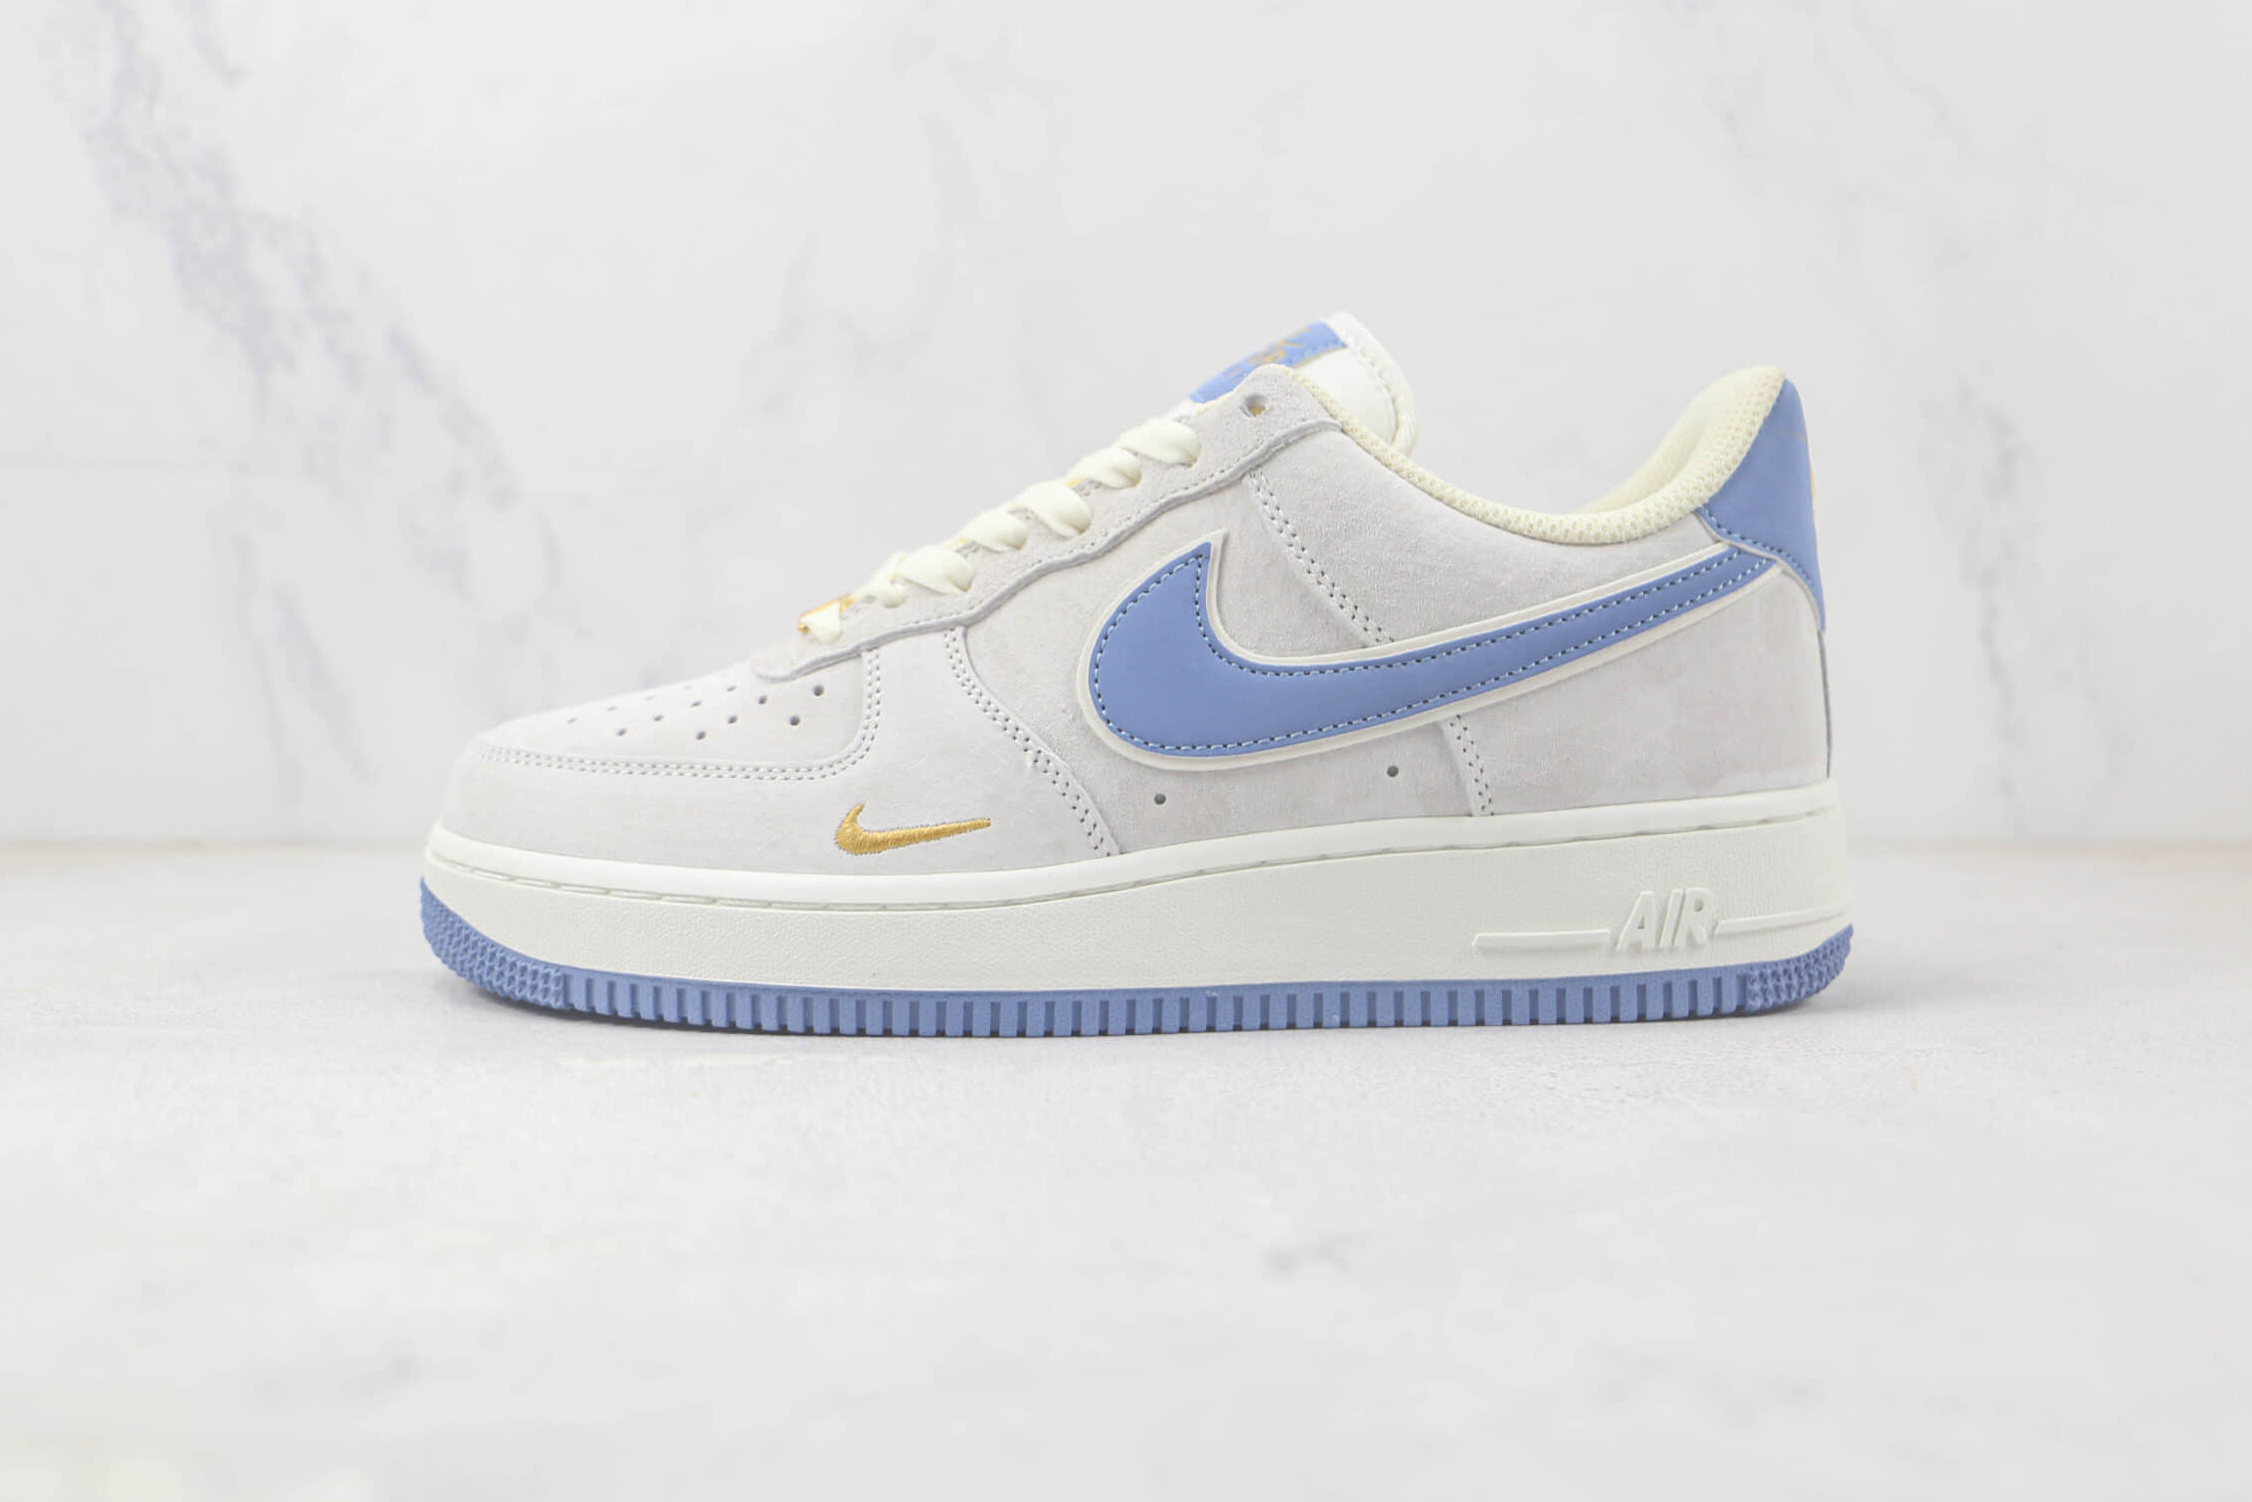 Nike Air Force 1 07 Low Suede Light Grey Blue Gold KK5636-210 - Premium Style with a Touch of Elegance